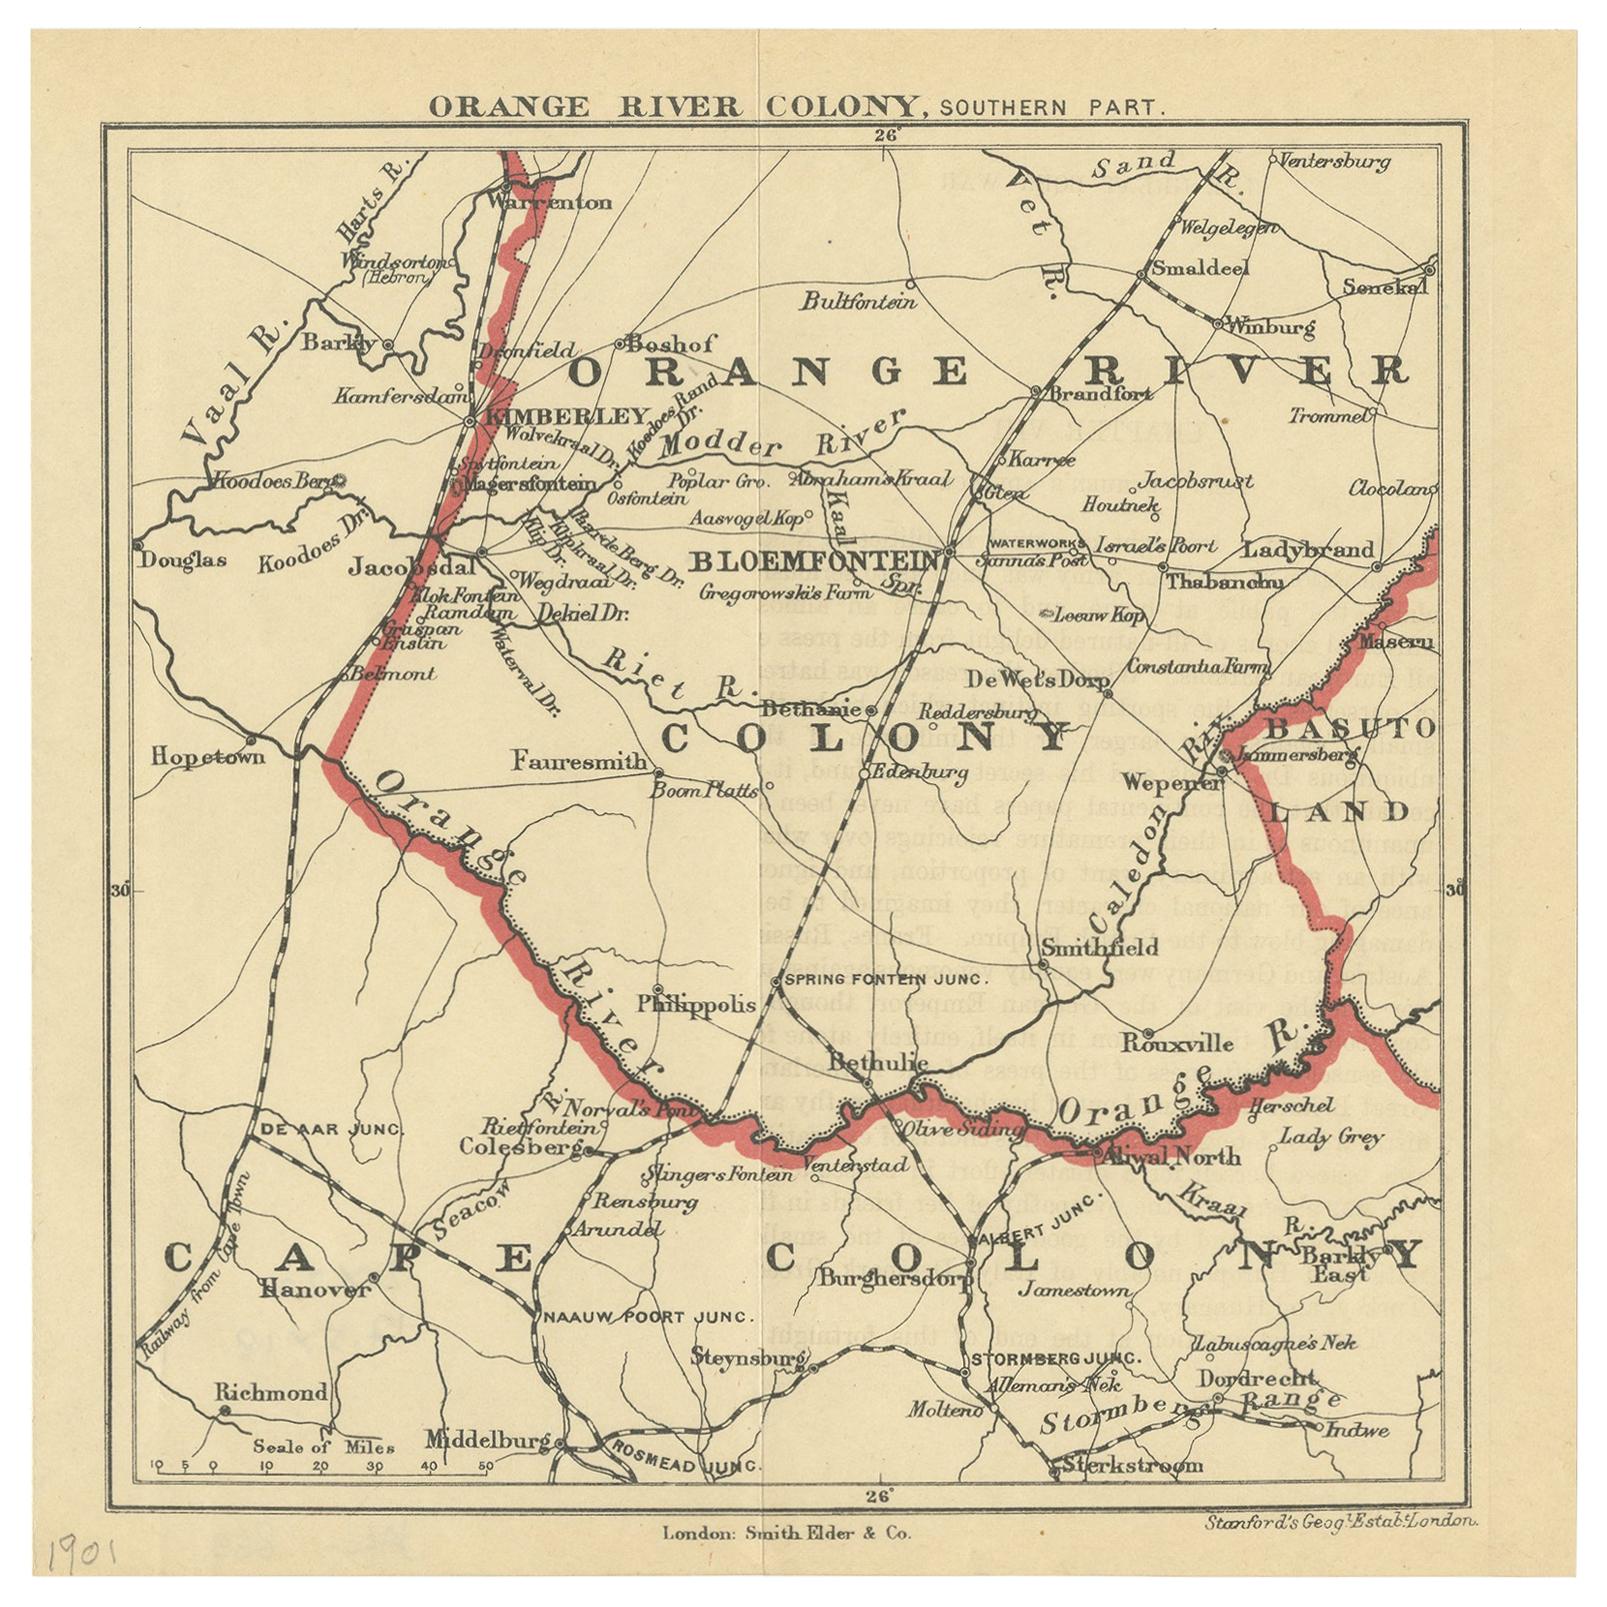 Antique Map of the Southern Part of the Orange River Colony by Stanford, 1901